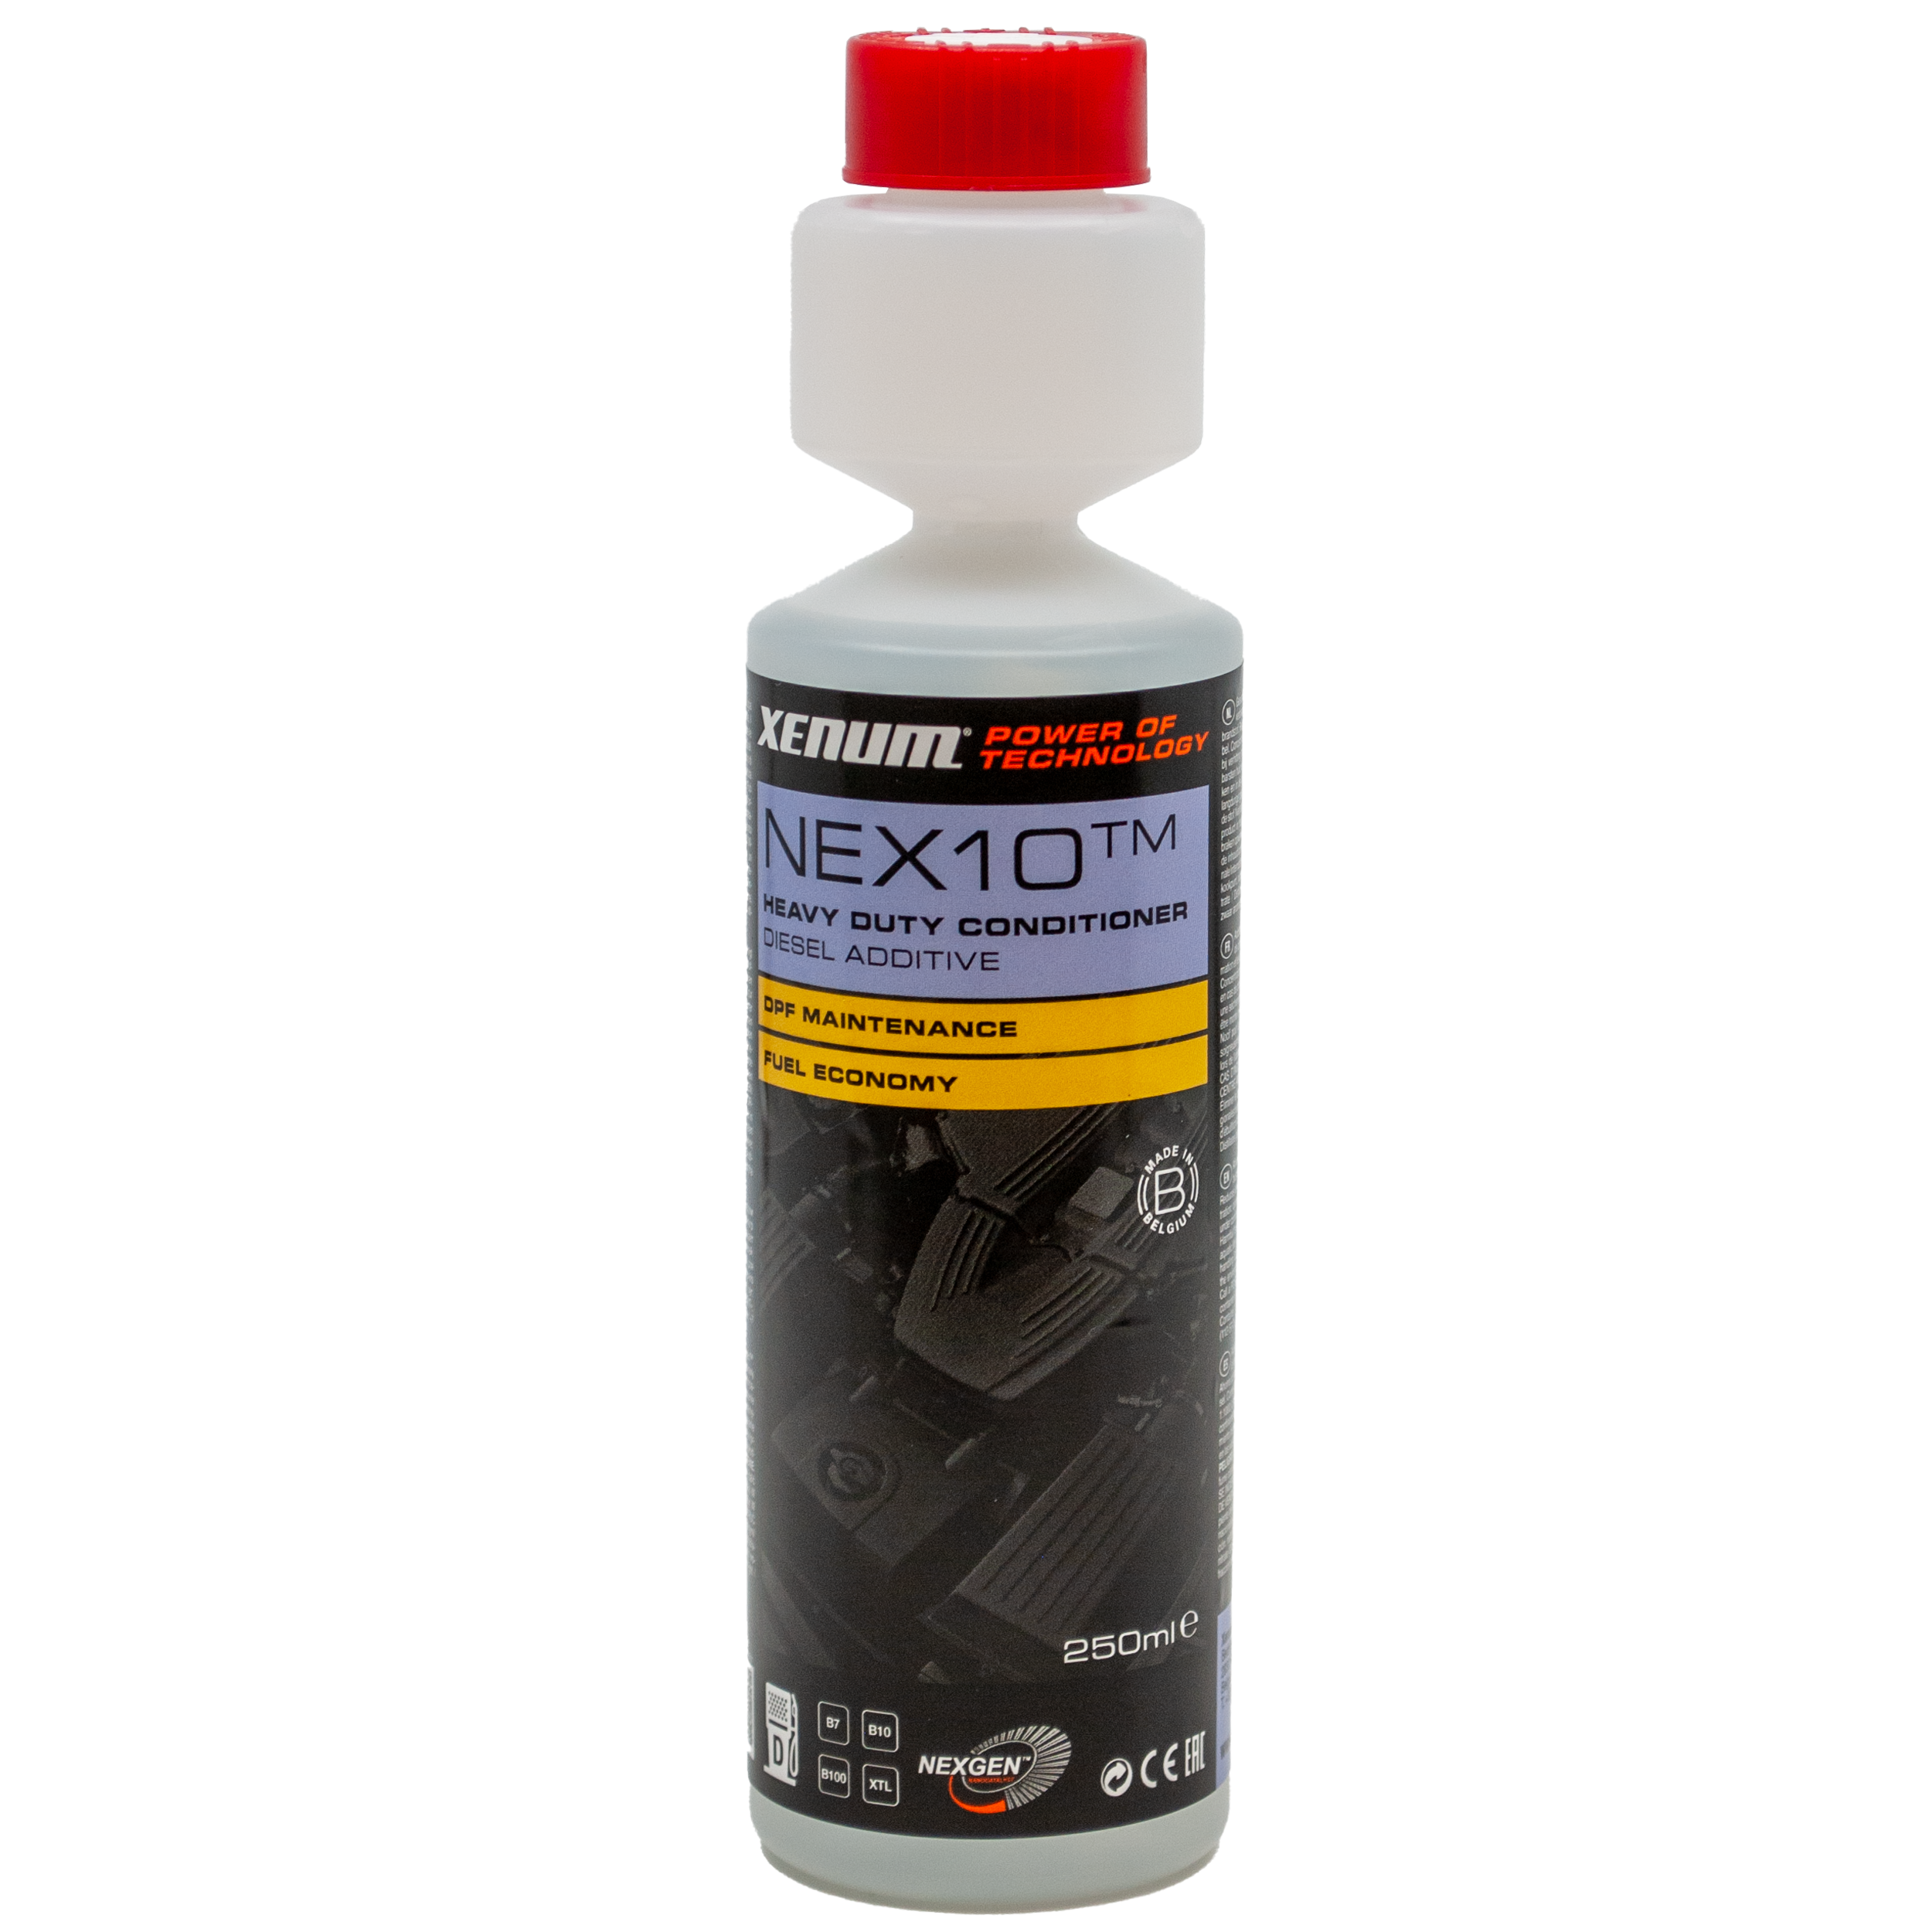 DPF Cleaner - Xenum France